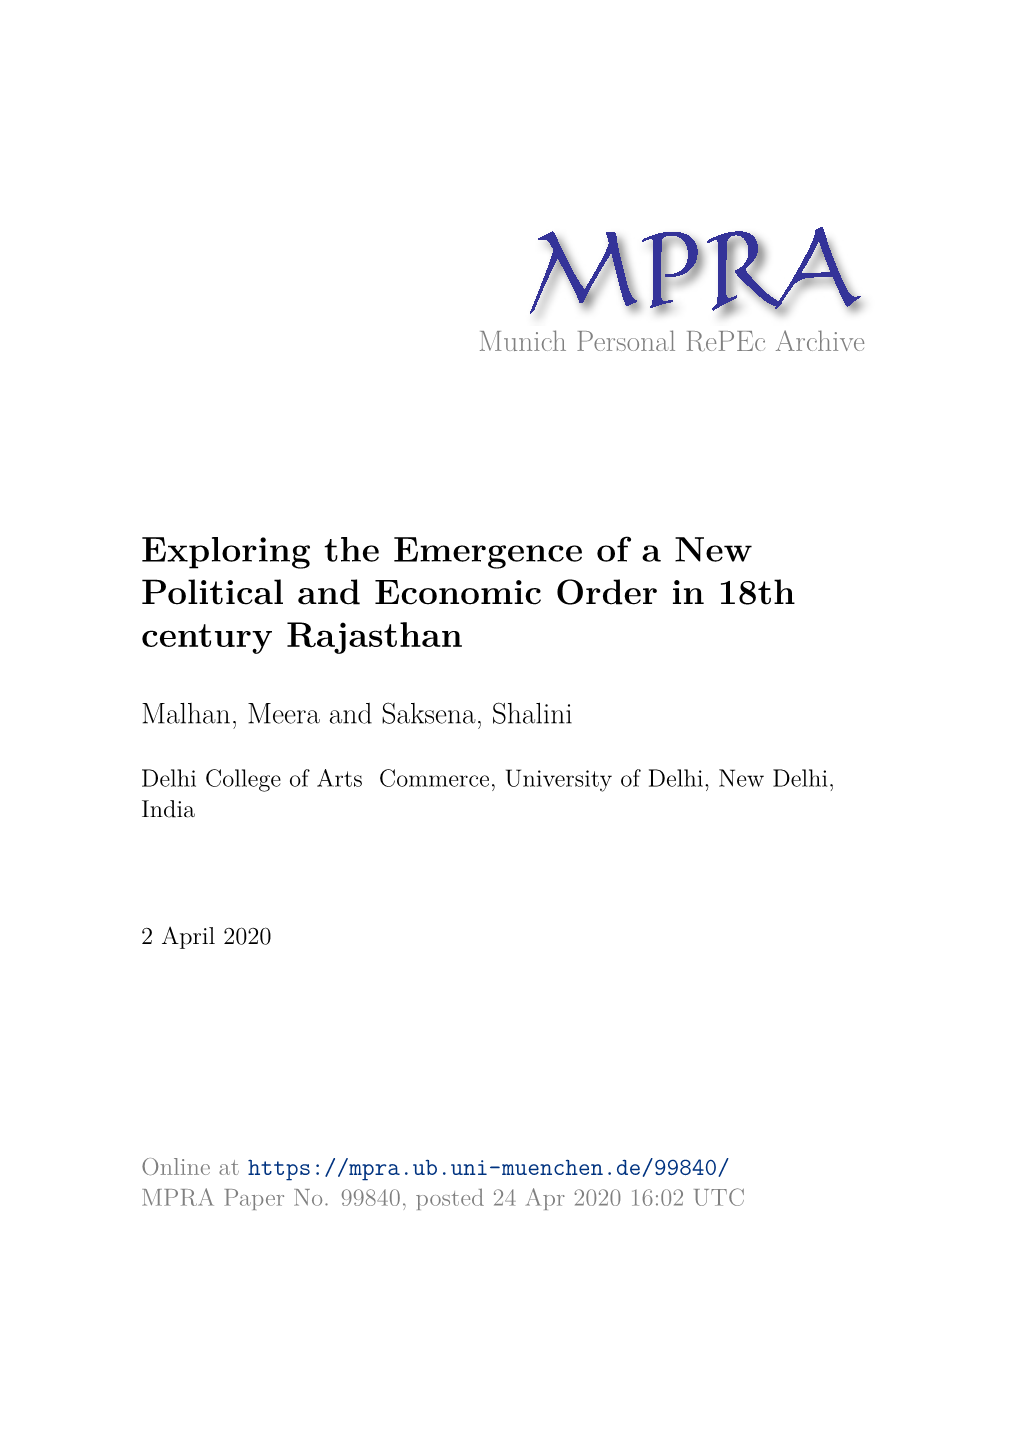 Exploring the Emergence of a New Political and Economic Order in 18Th Century Rajasthan